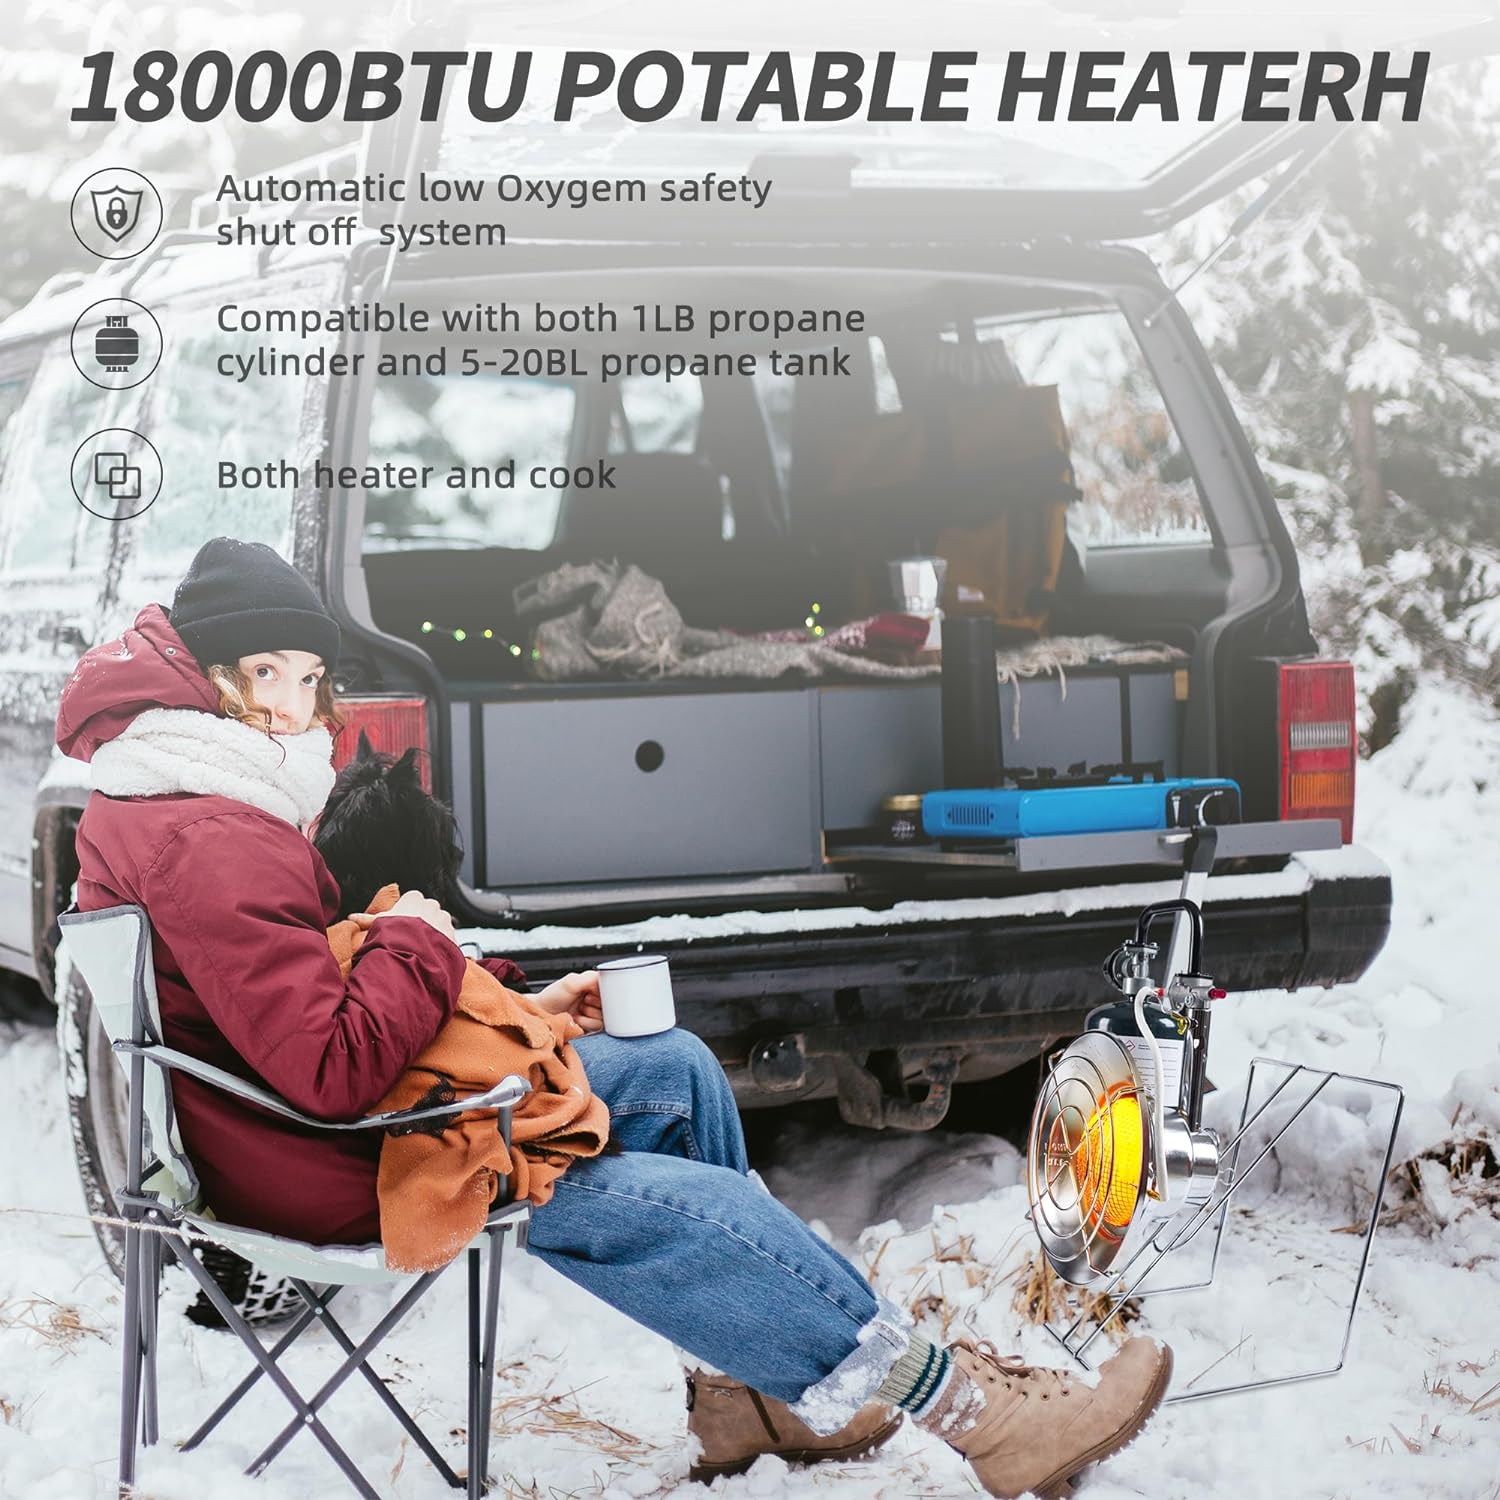 GASPOWOR Multi-Use Portable Propane Heater/Cooker,18,000 BTU Propane Outdoor Heater with 8.8 FT Hose (CSA) for Camping, Garage, Patio,Tent Heater for Hunting, Fishing or RVs(Fuel not included) - GASPOWOR Propane Heater Review